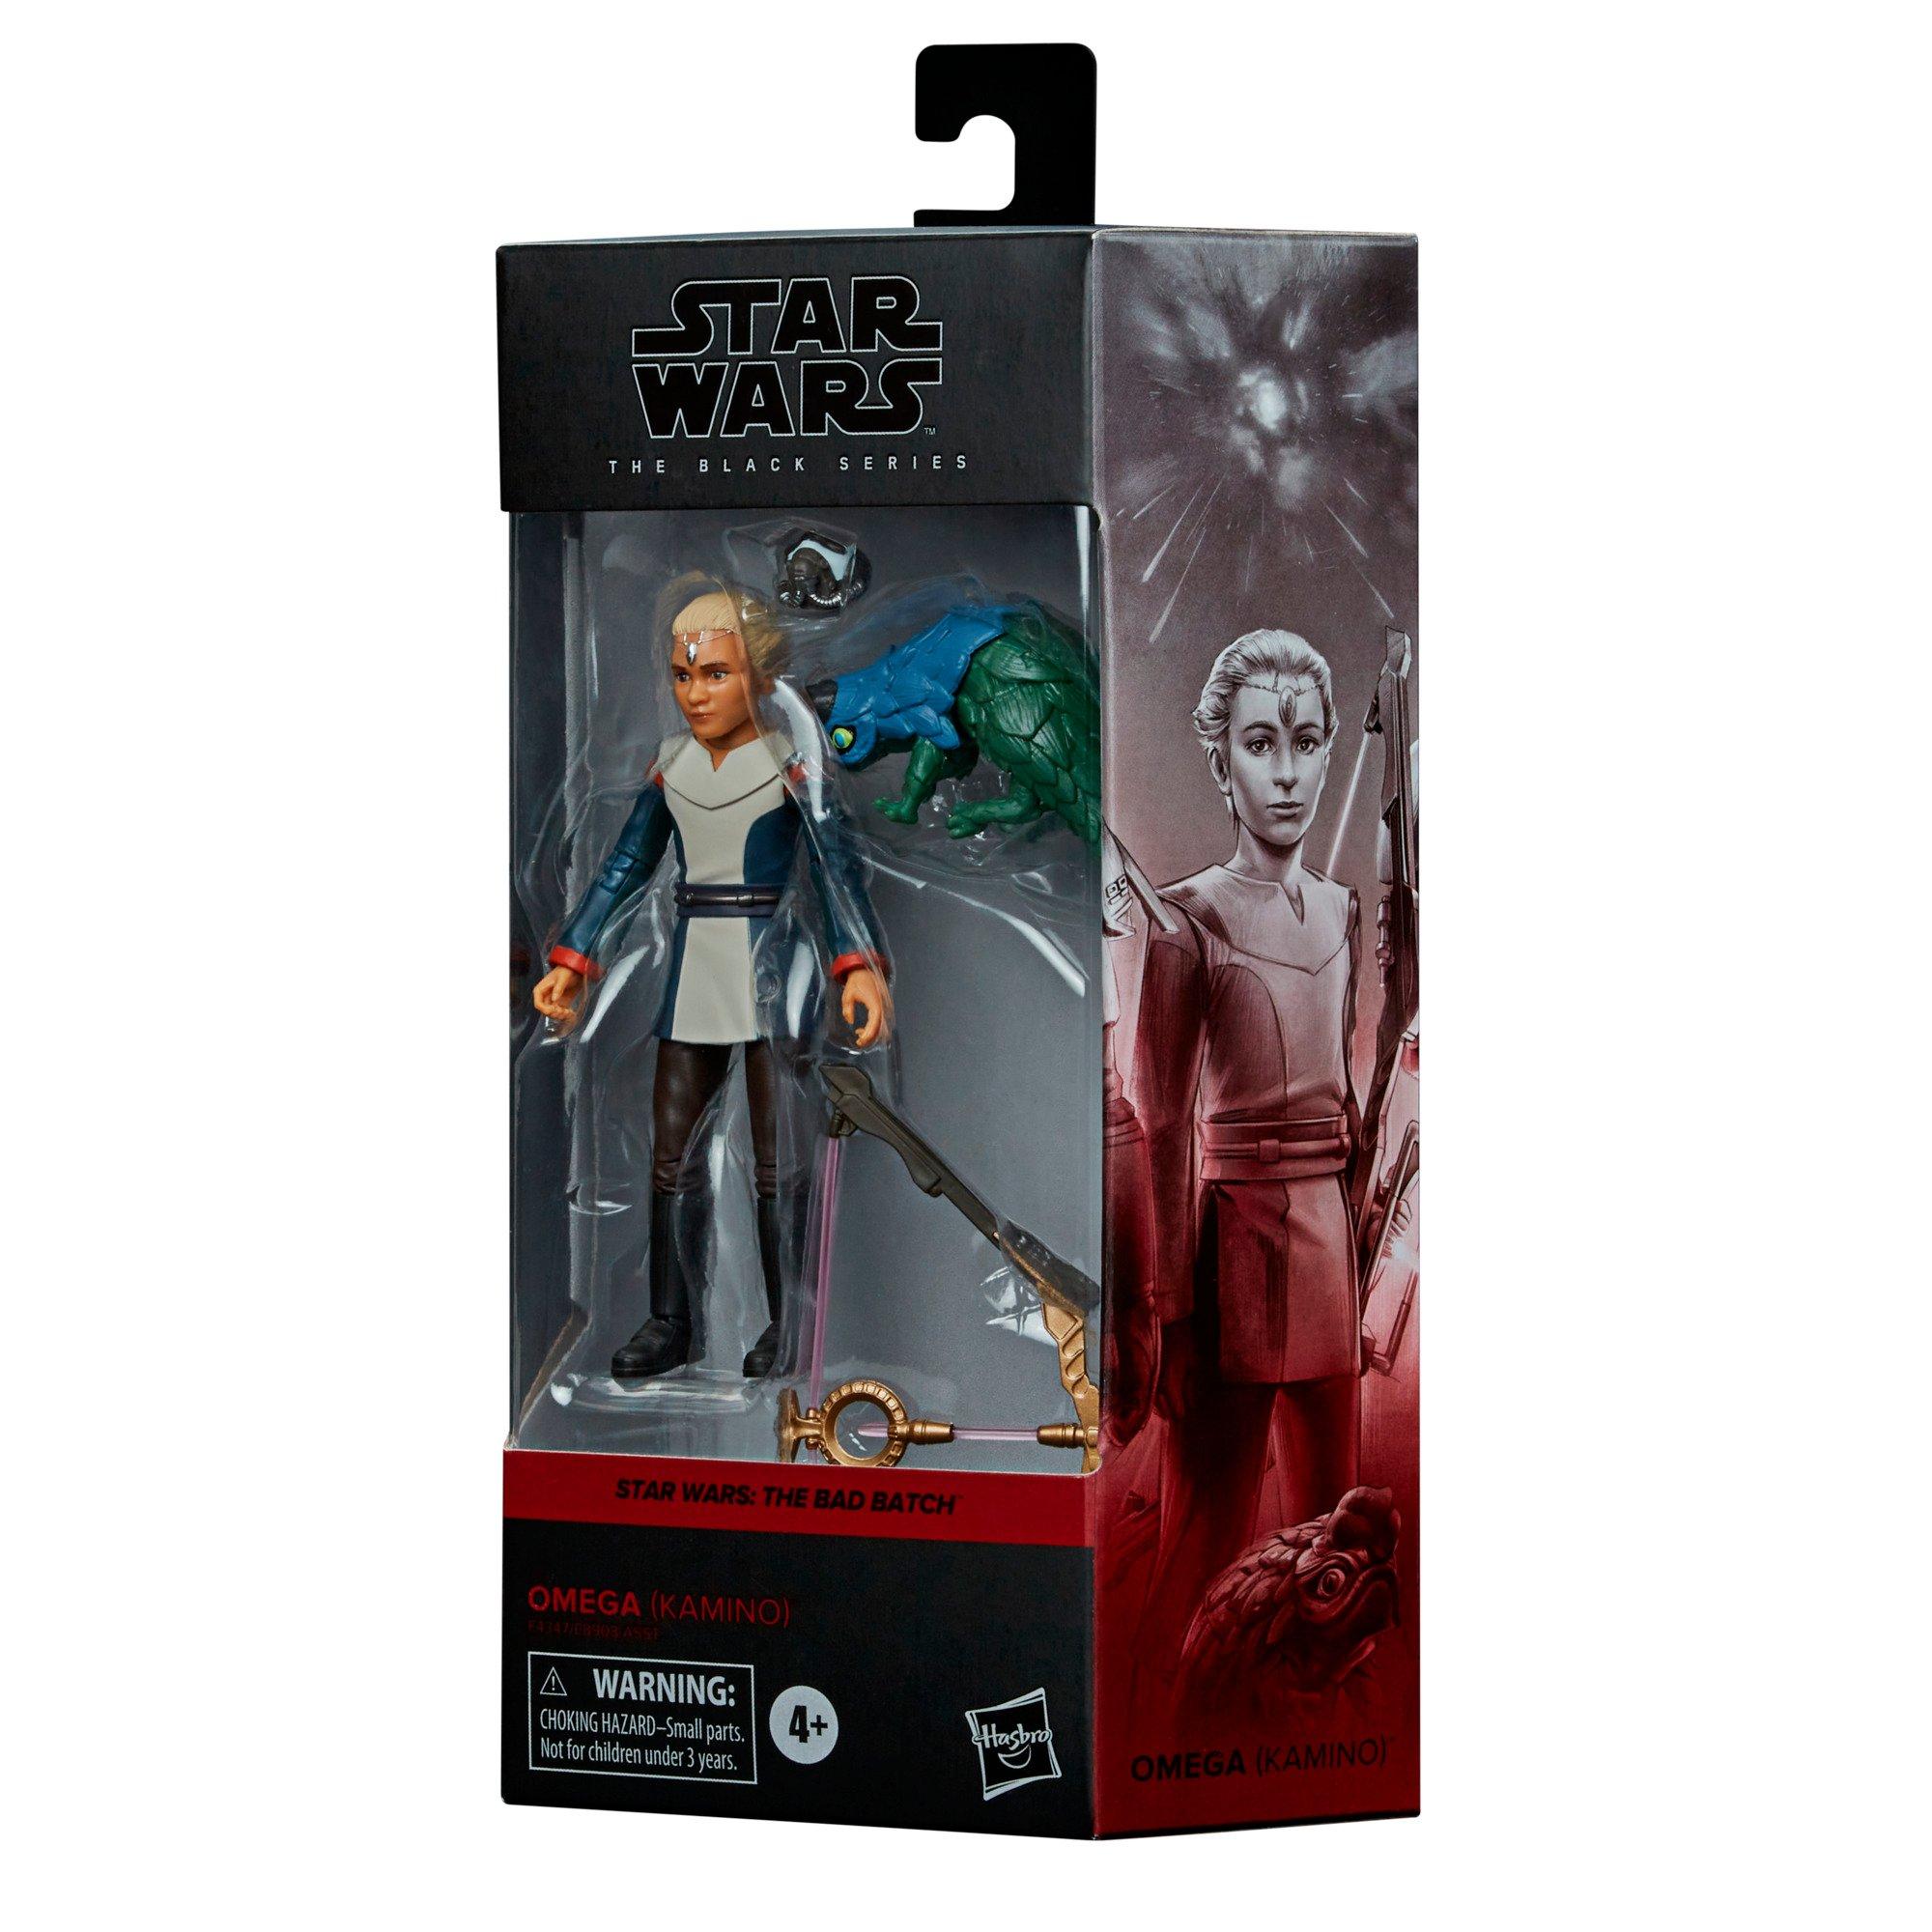 Hasbro Star Wars: The Bad Batch Omega (Kamino) The Black Series 6-in Action Figure